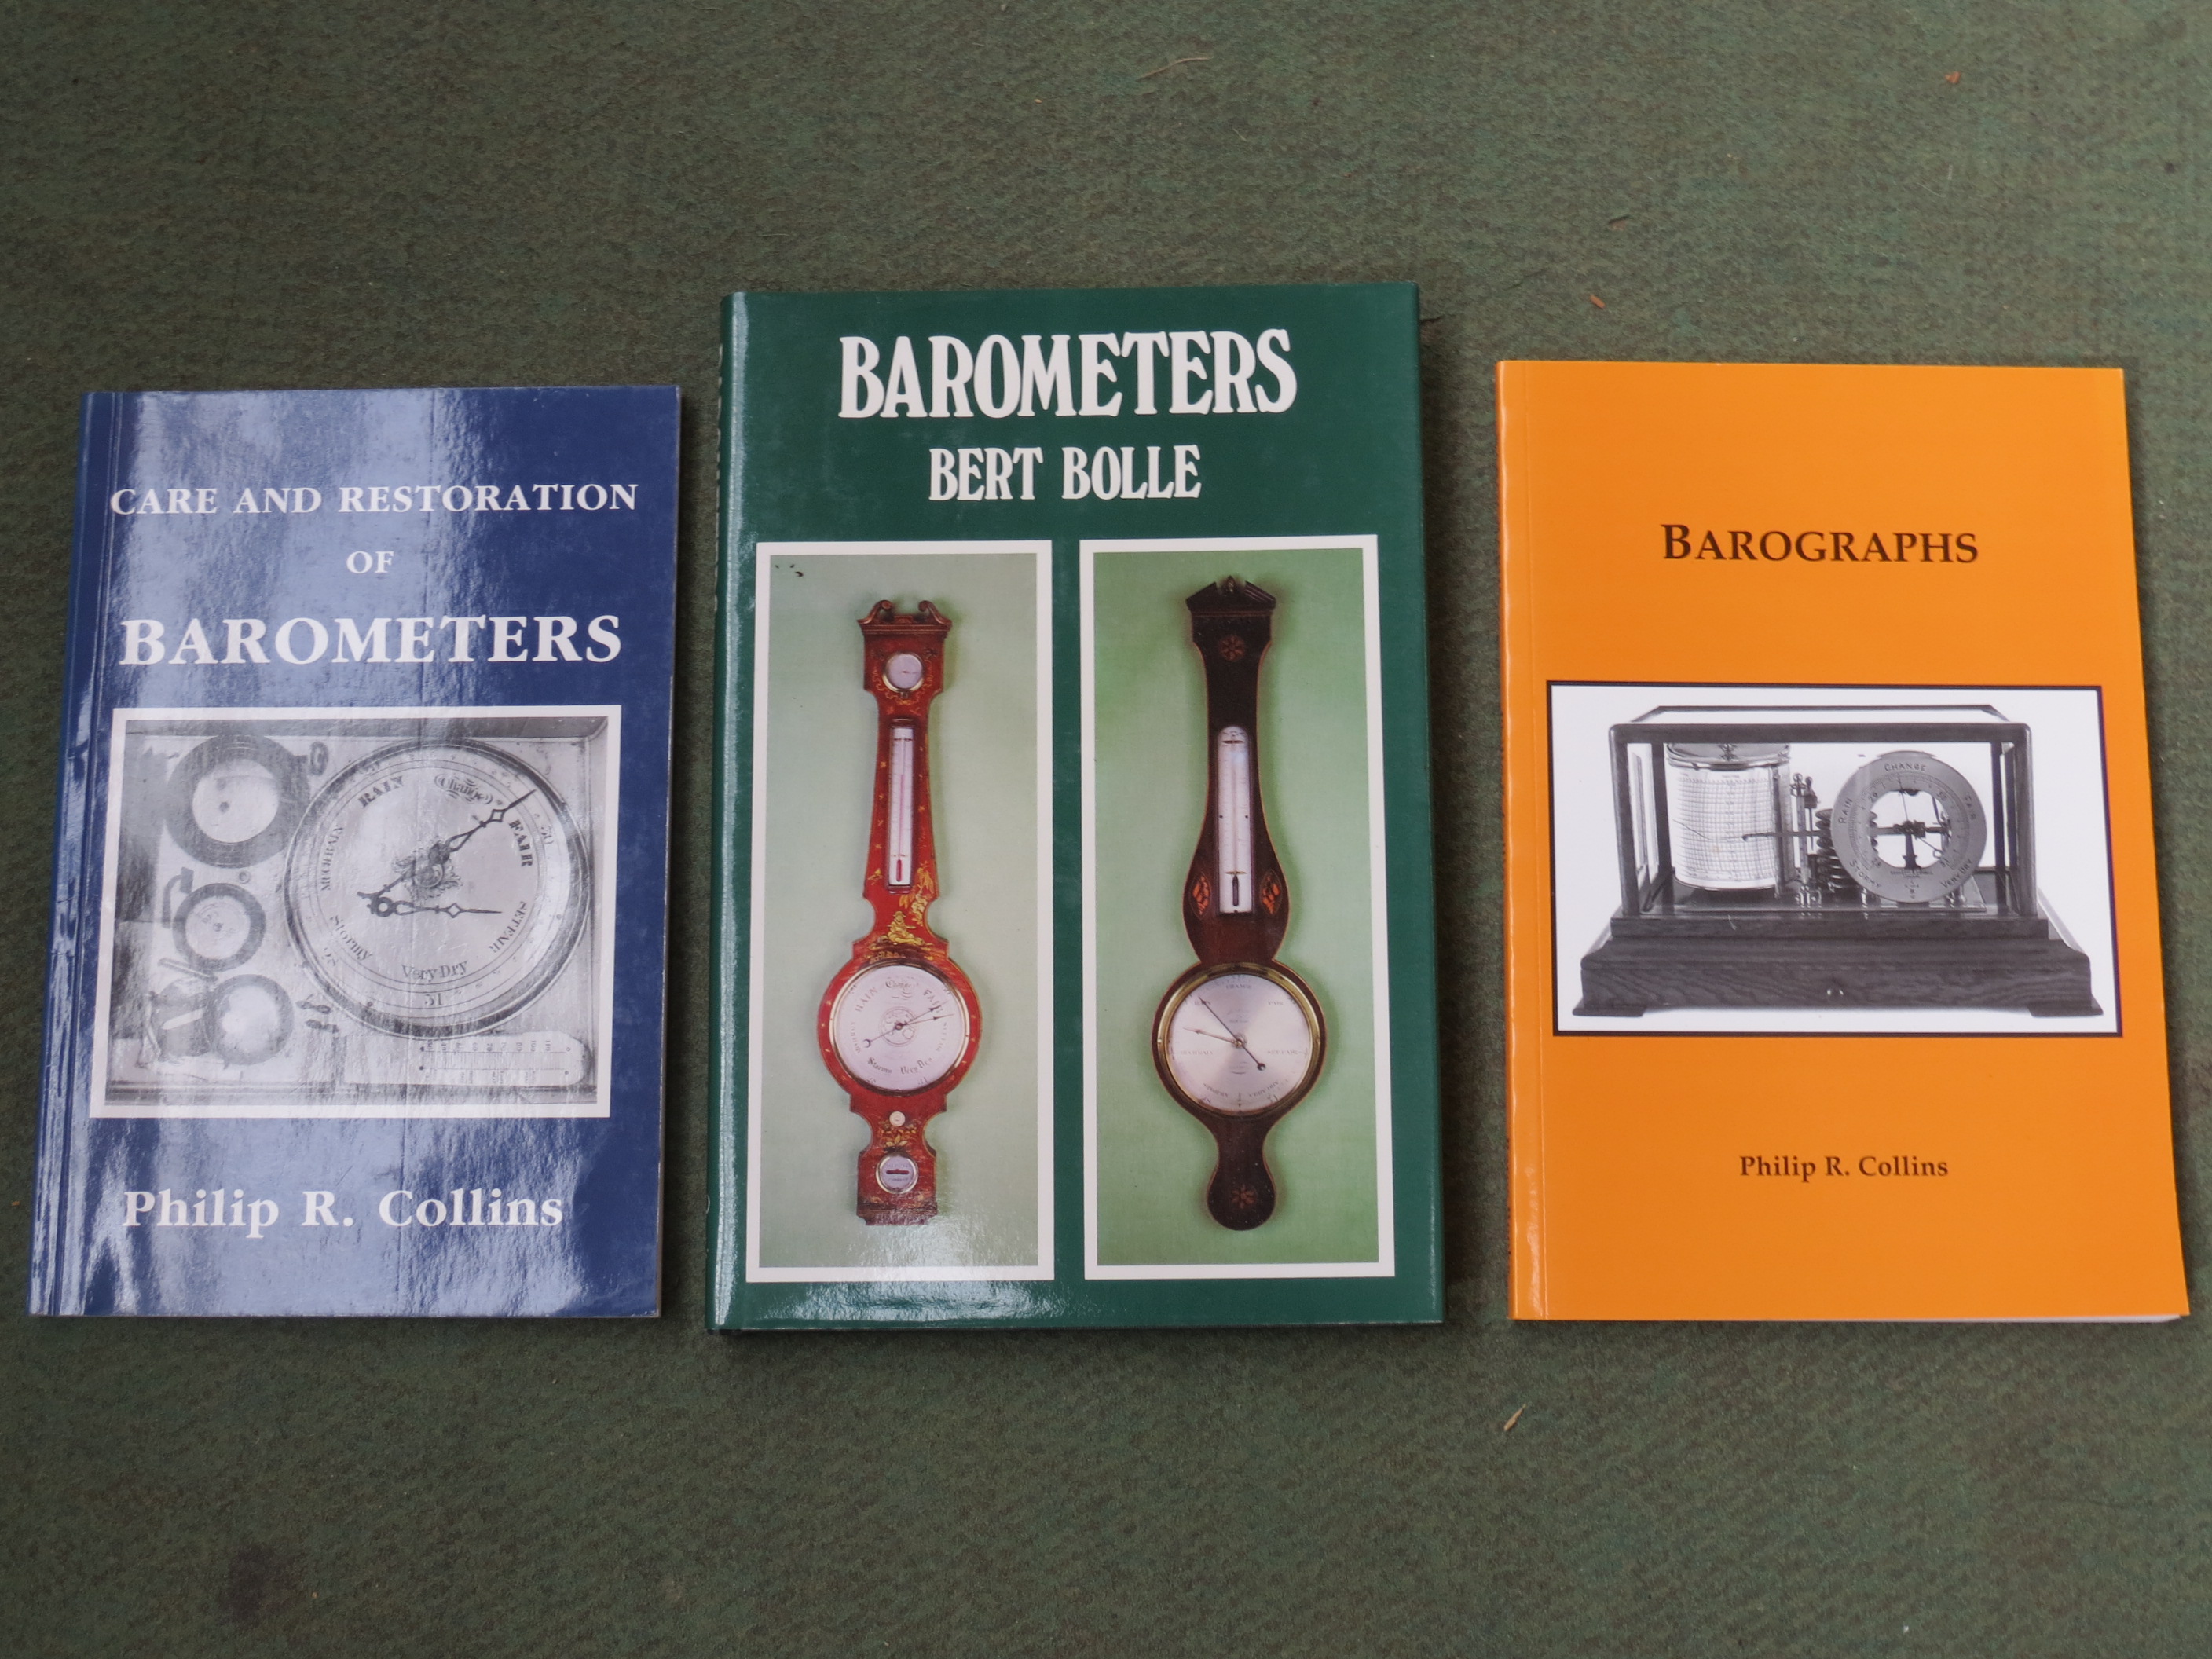 A hardback volume by Bert Bolle "Barometers" (1984), and two by Philip R.